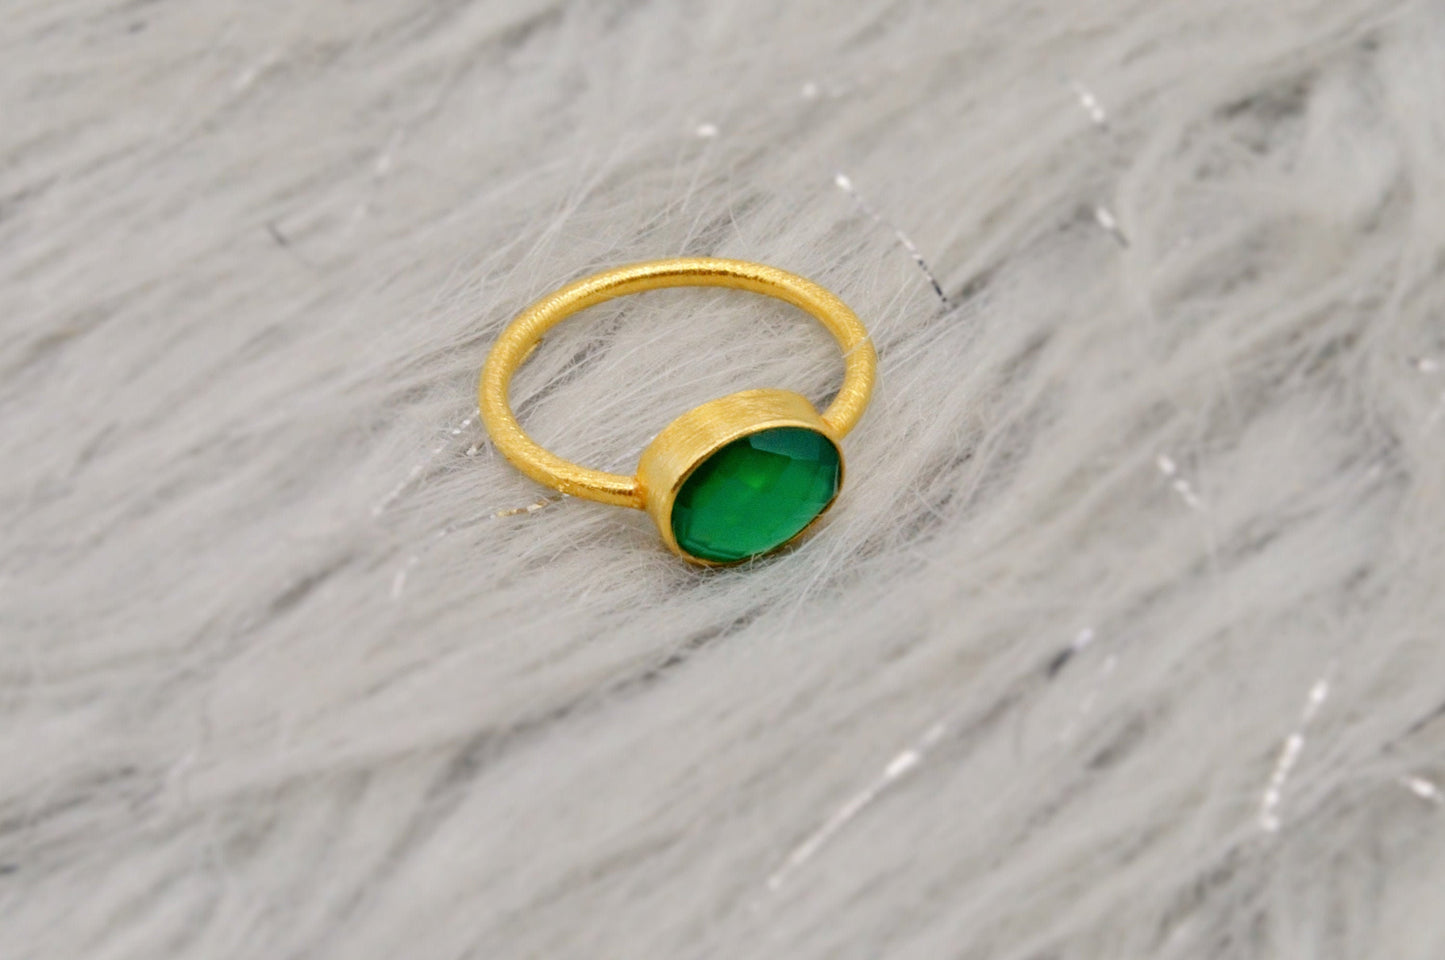 Green Onyx Gold Ring, Dainty Raw Gem Ring, Gold Plated Sterling Silver, Statement Gemstone, Stacking Rings For Women, Green Stone Ring